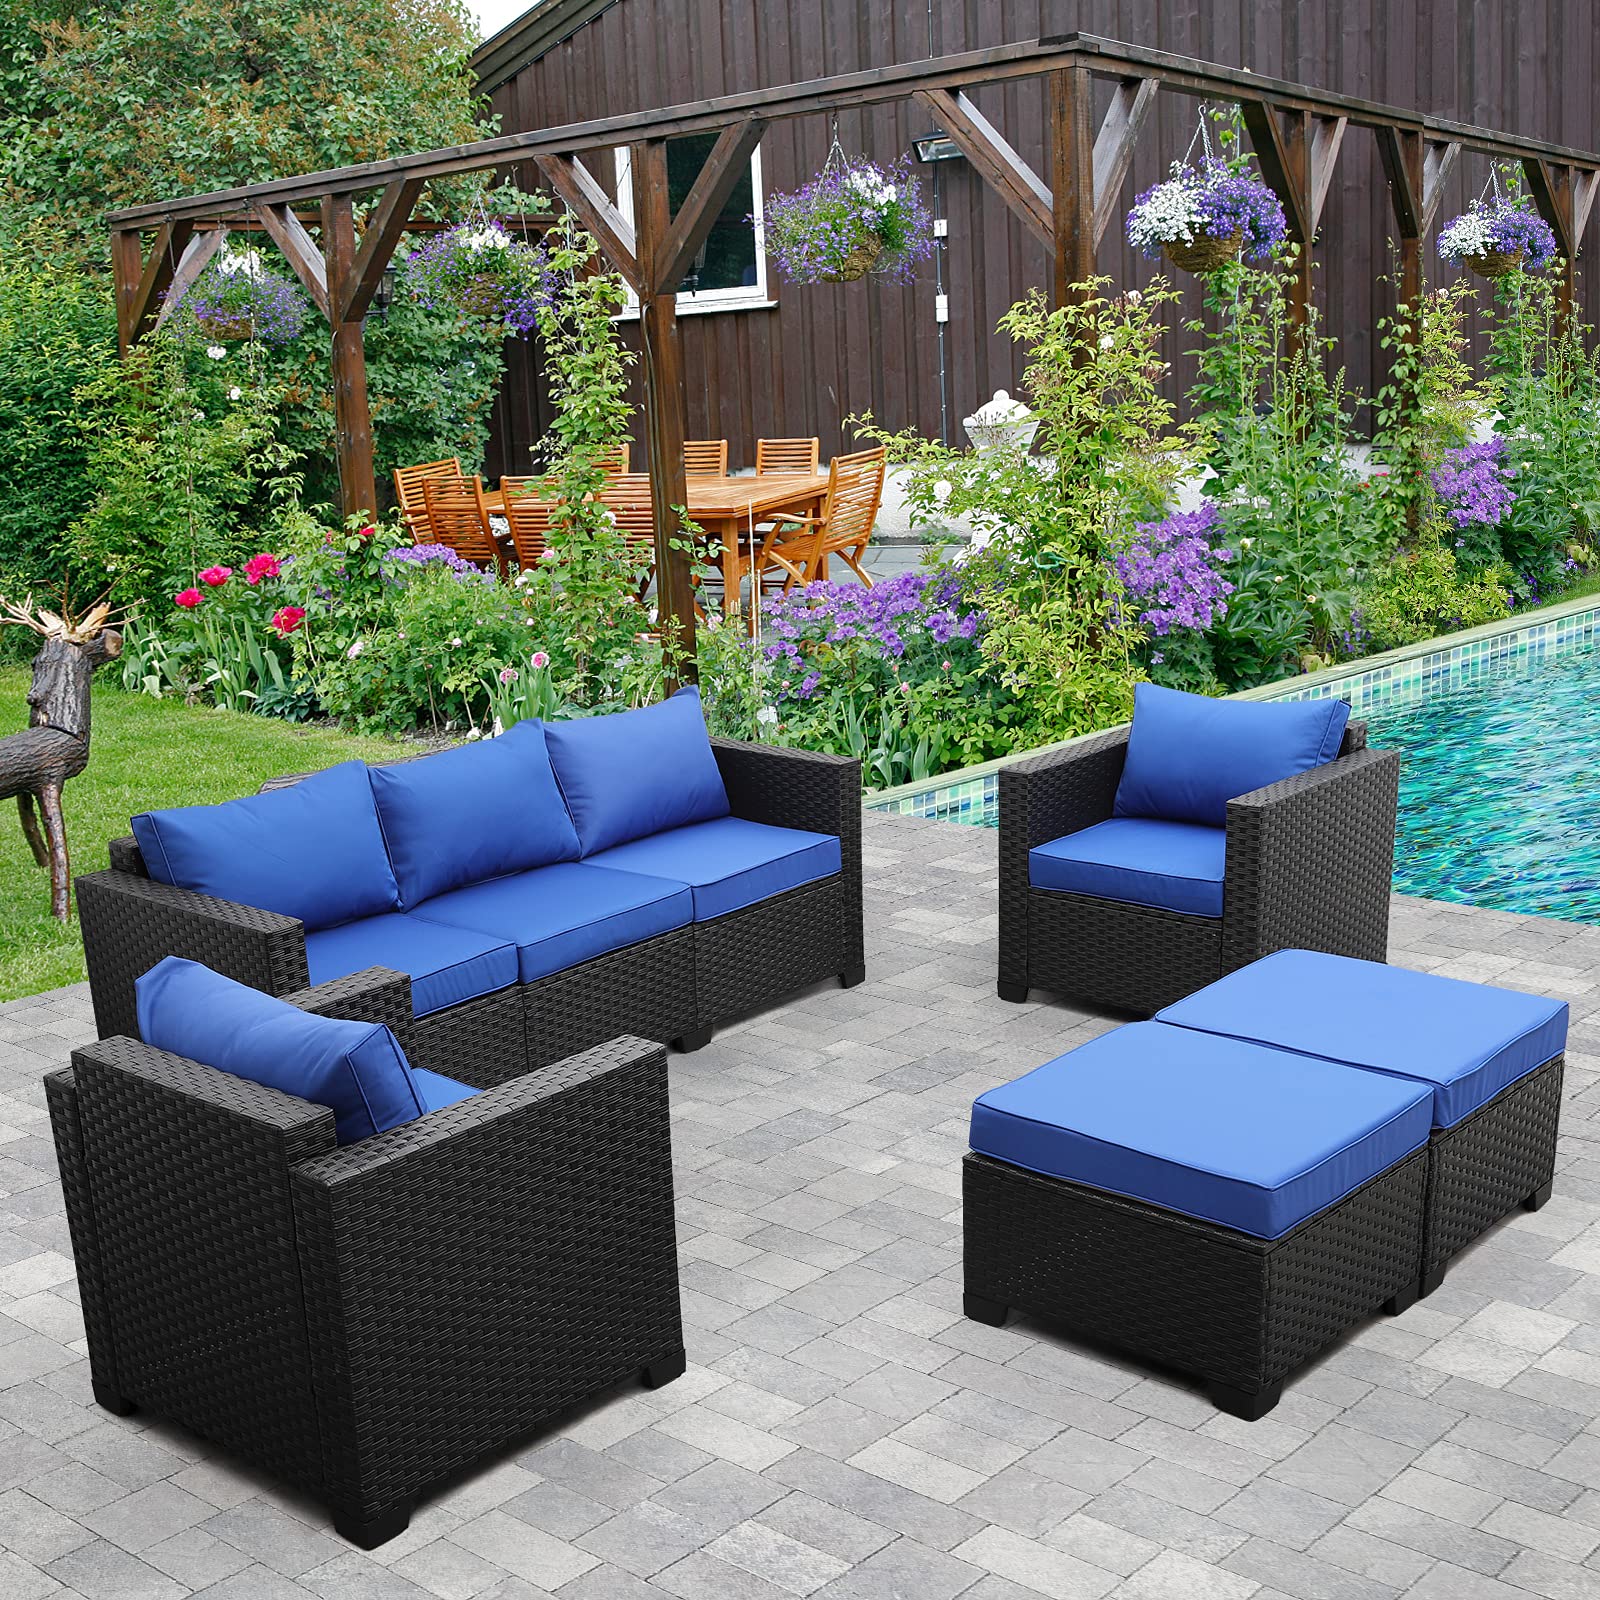 Rattaner Outdoor Wicker Furniture couch Set 5 Pieces, Patio Furniture Sectional Sofa with Royal Blue cushions and Furniture covers, Black